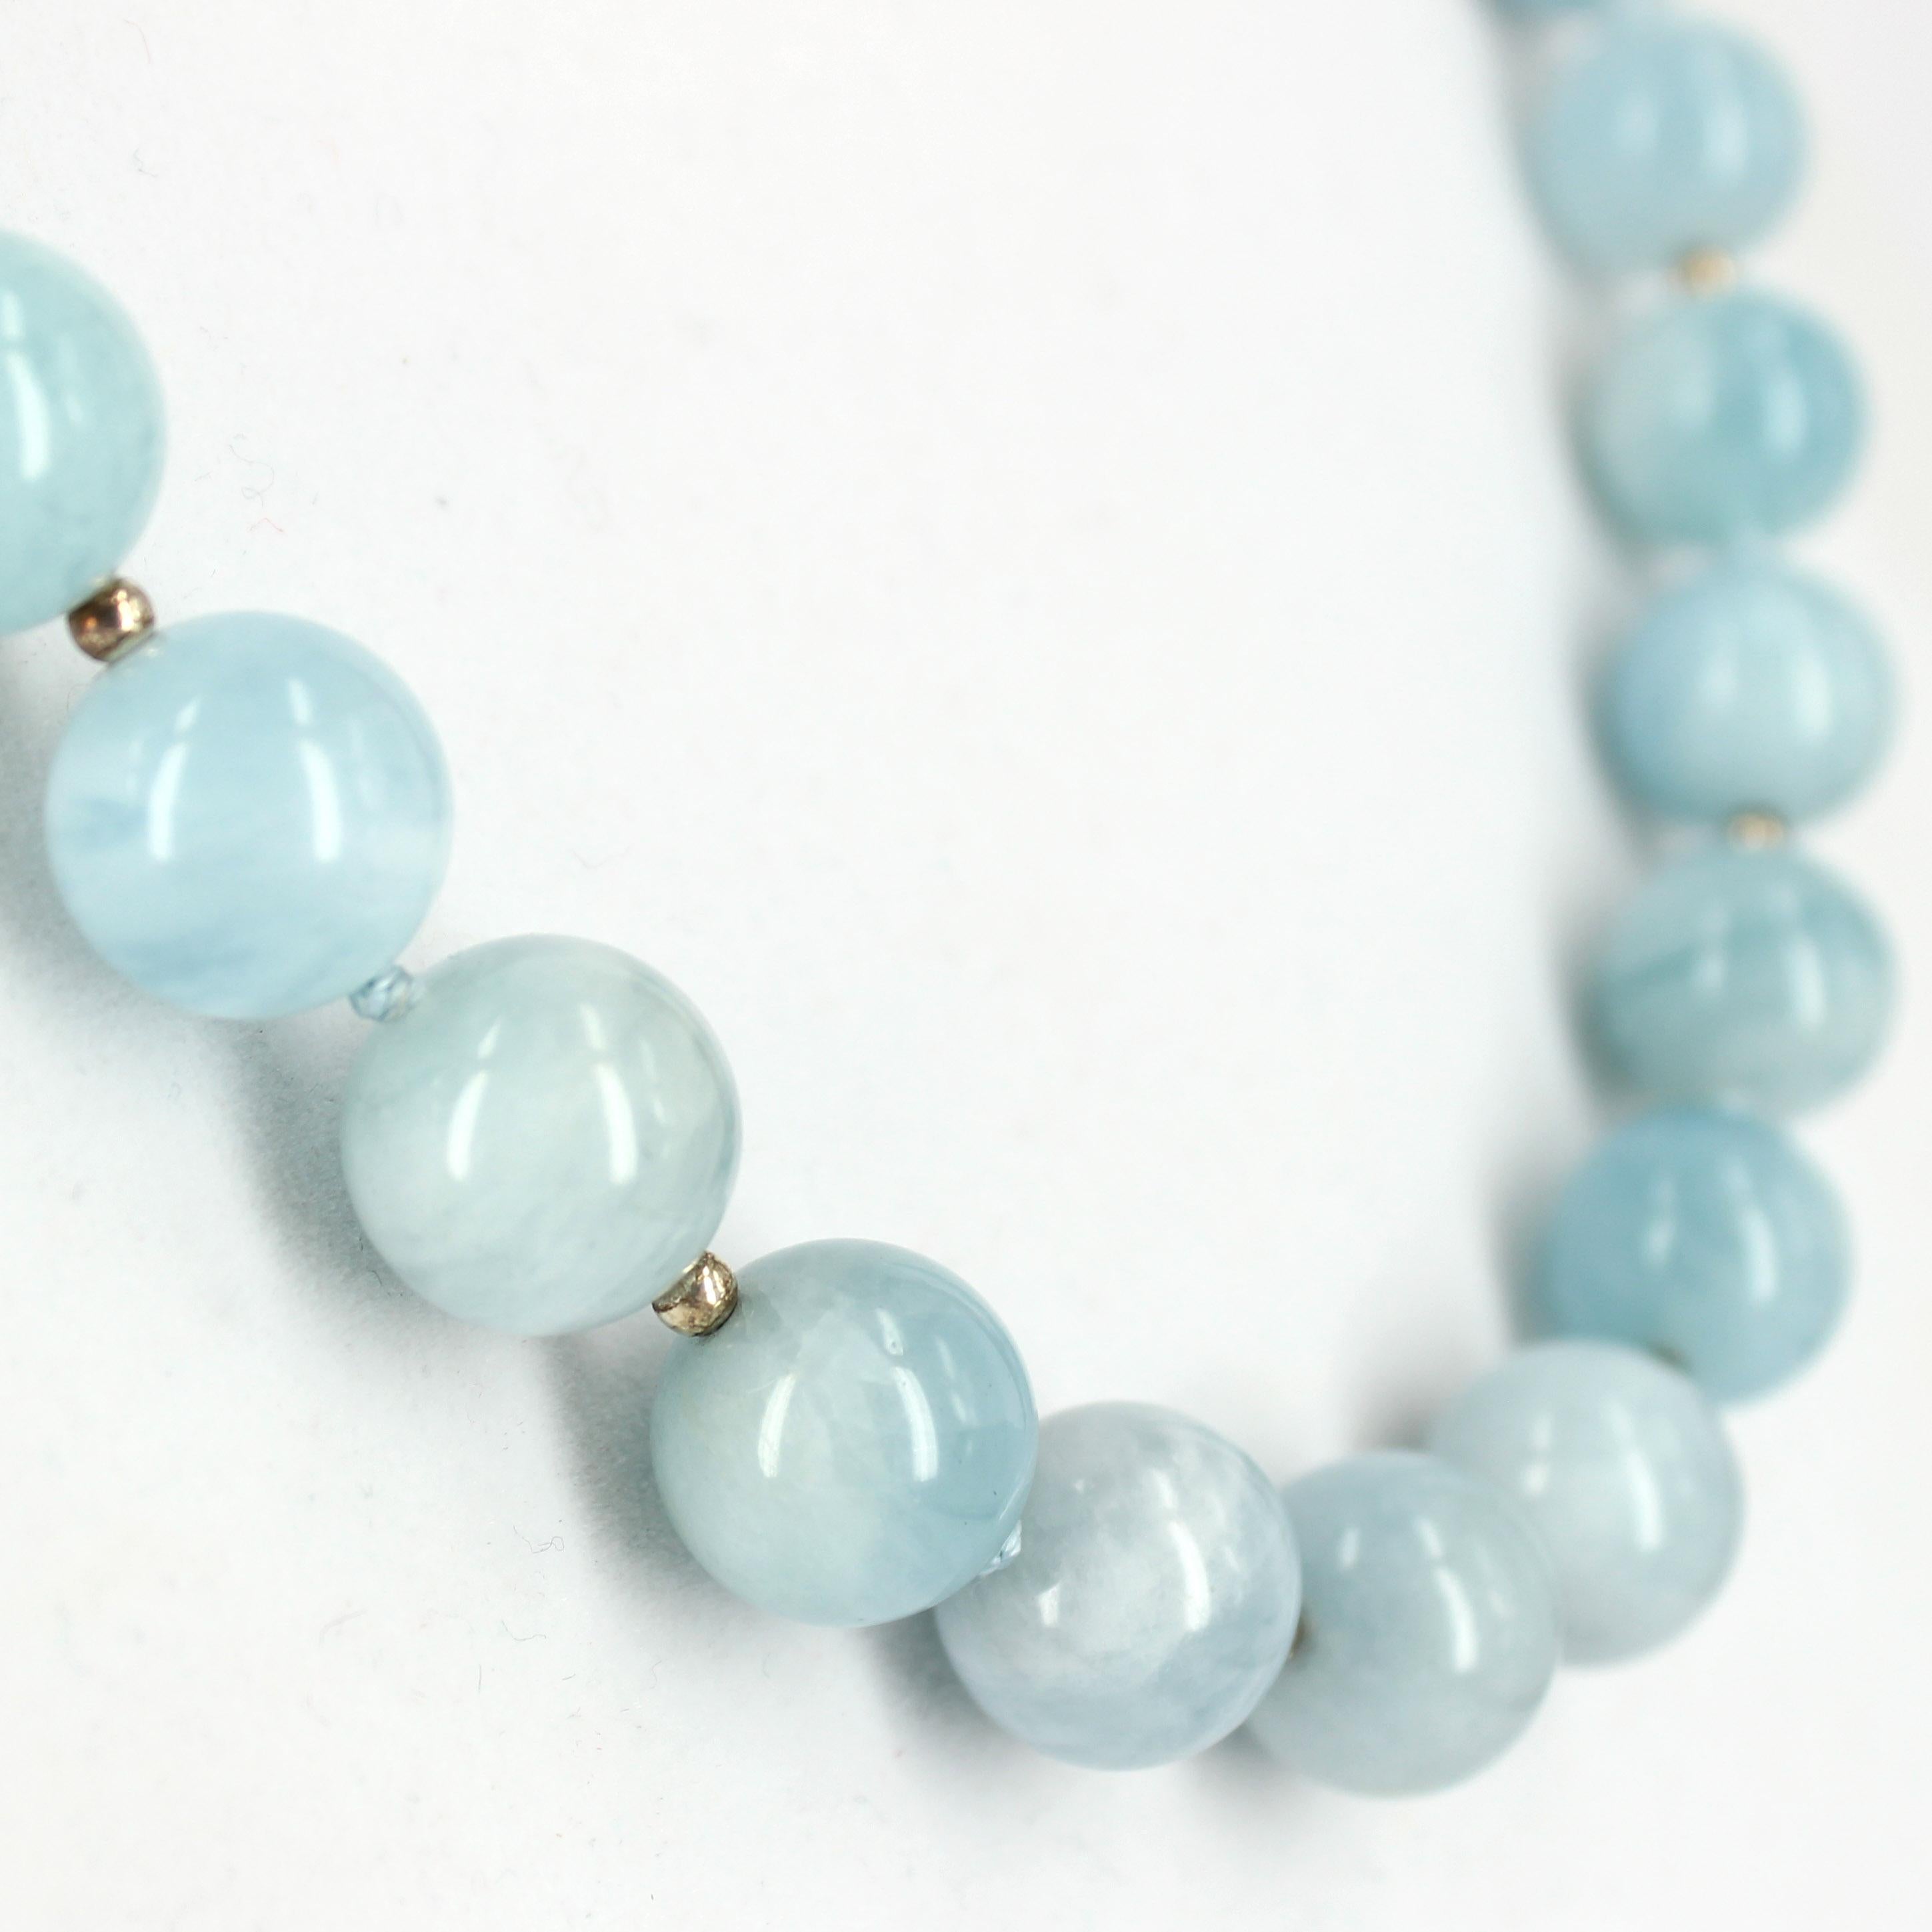 This beautiful 14mm Natural Aquamarine necklace features 32 high polished beads with added 3mm Sterling Silver beads and knotted in sections, finished with Sterling Silver bolt clasp. A simple necklace that you can dress up or dress down.

Total